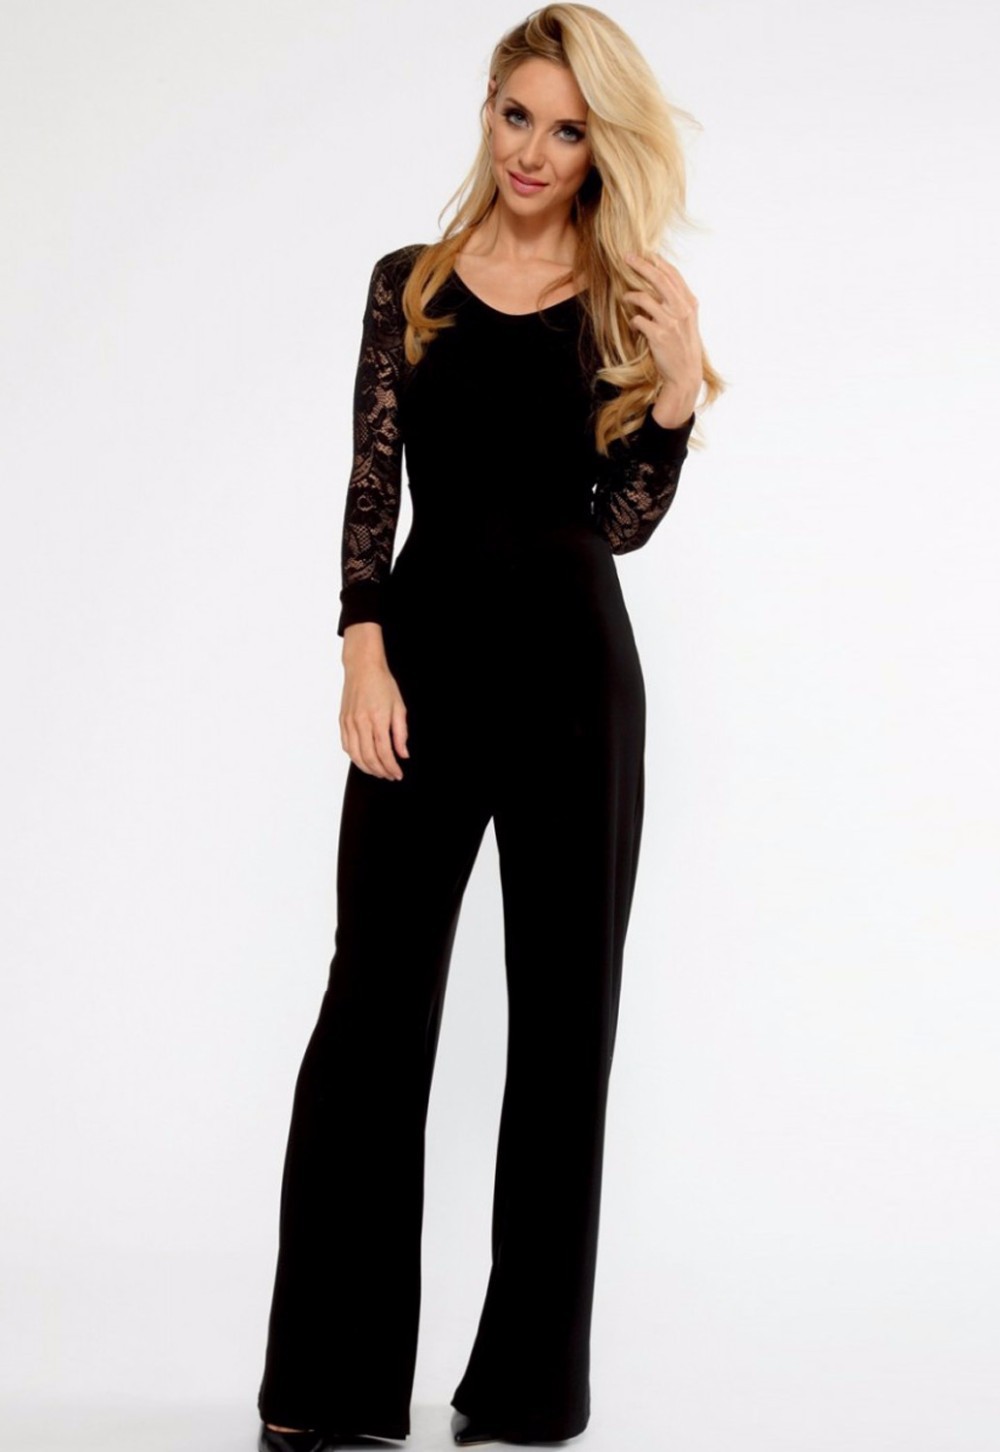 Black-Flared-Pant-Lace-Sleeve-Jumpsuit-LC6424-1